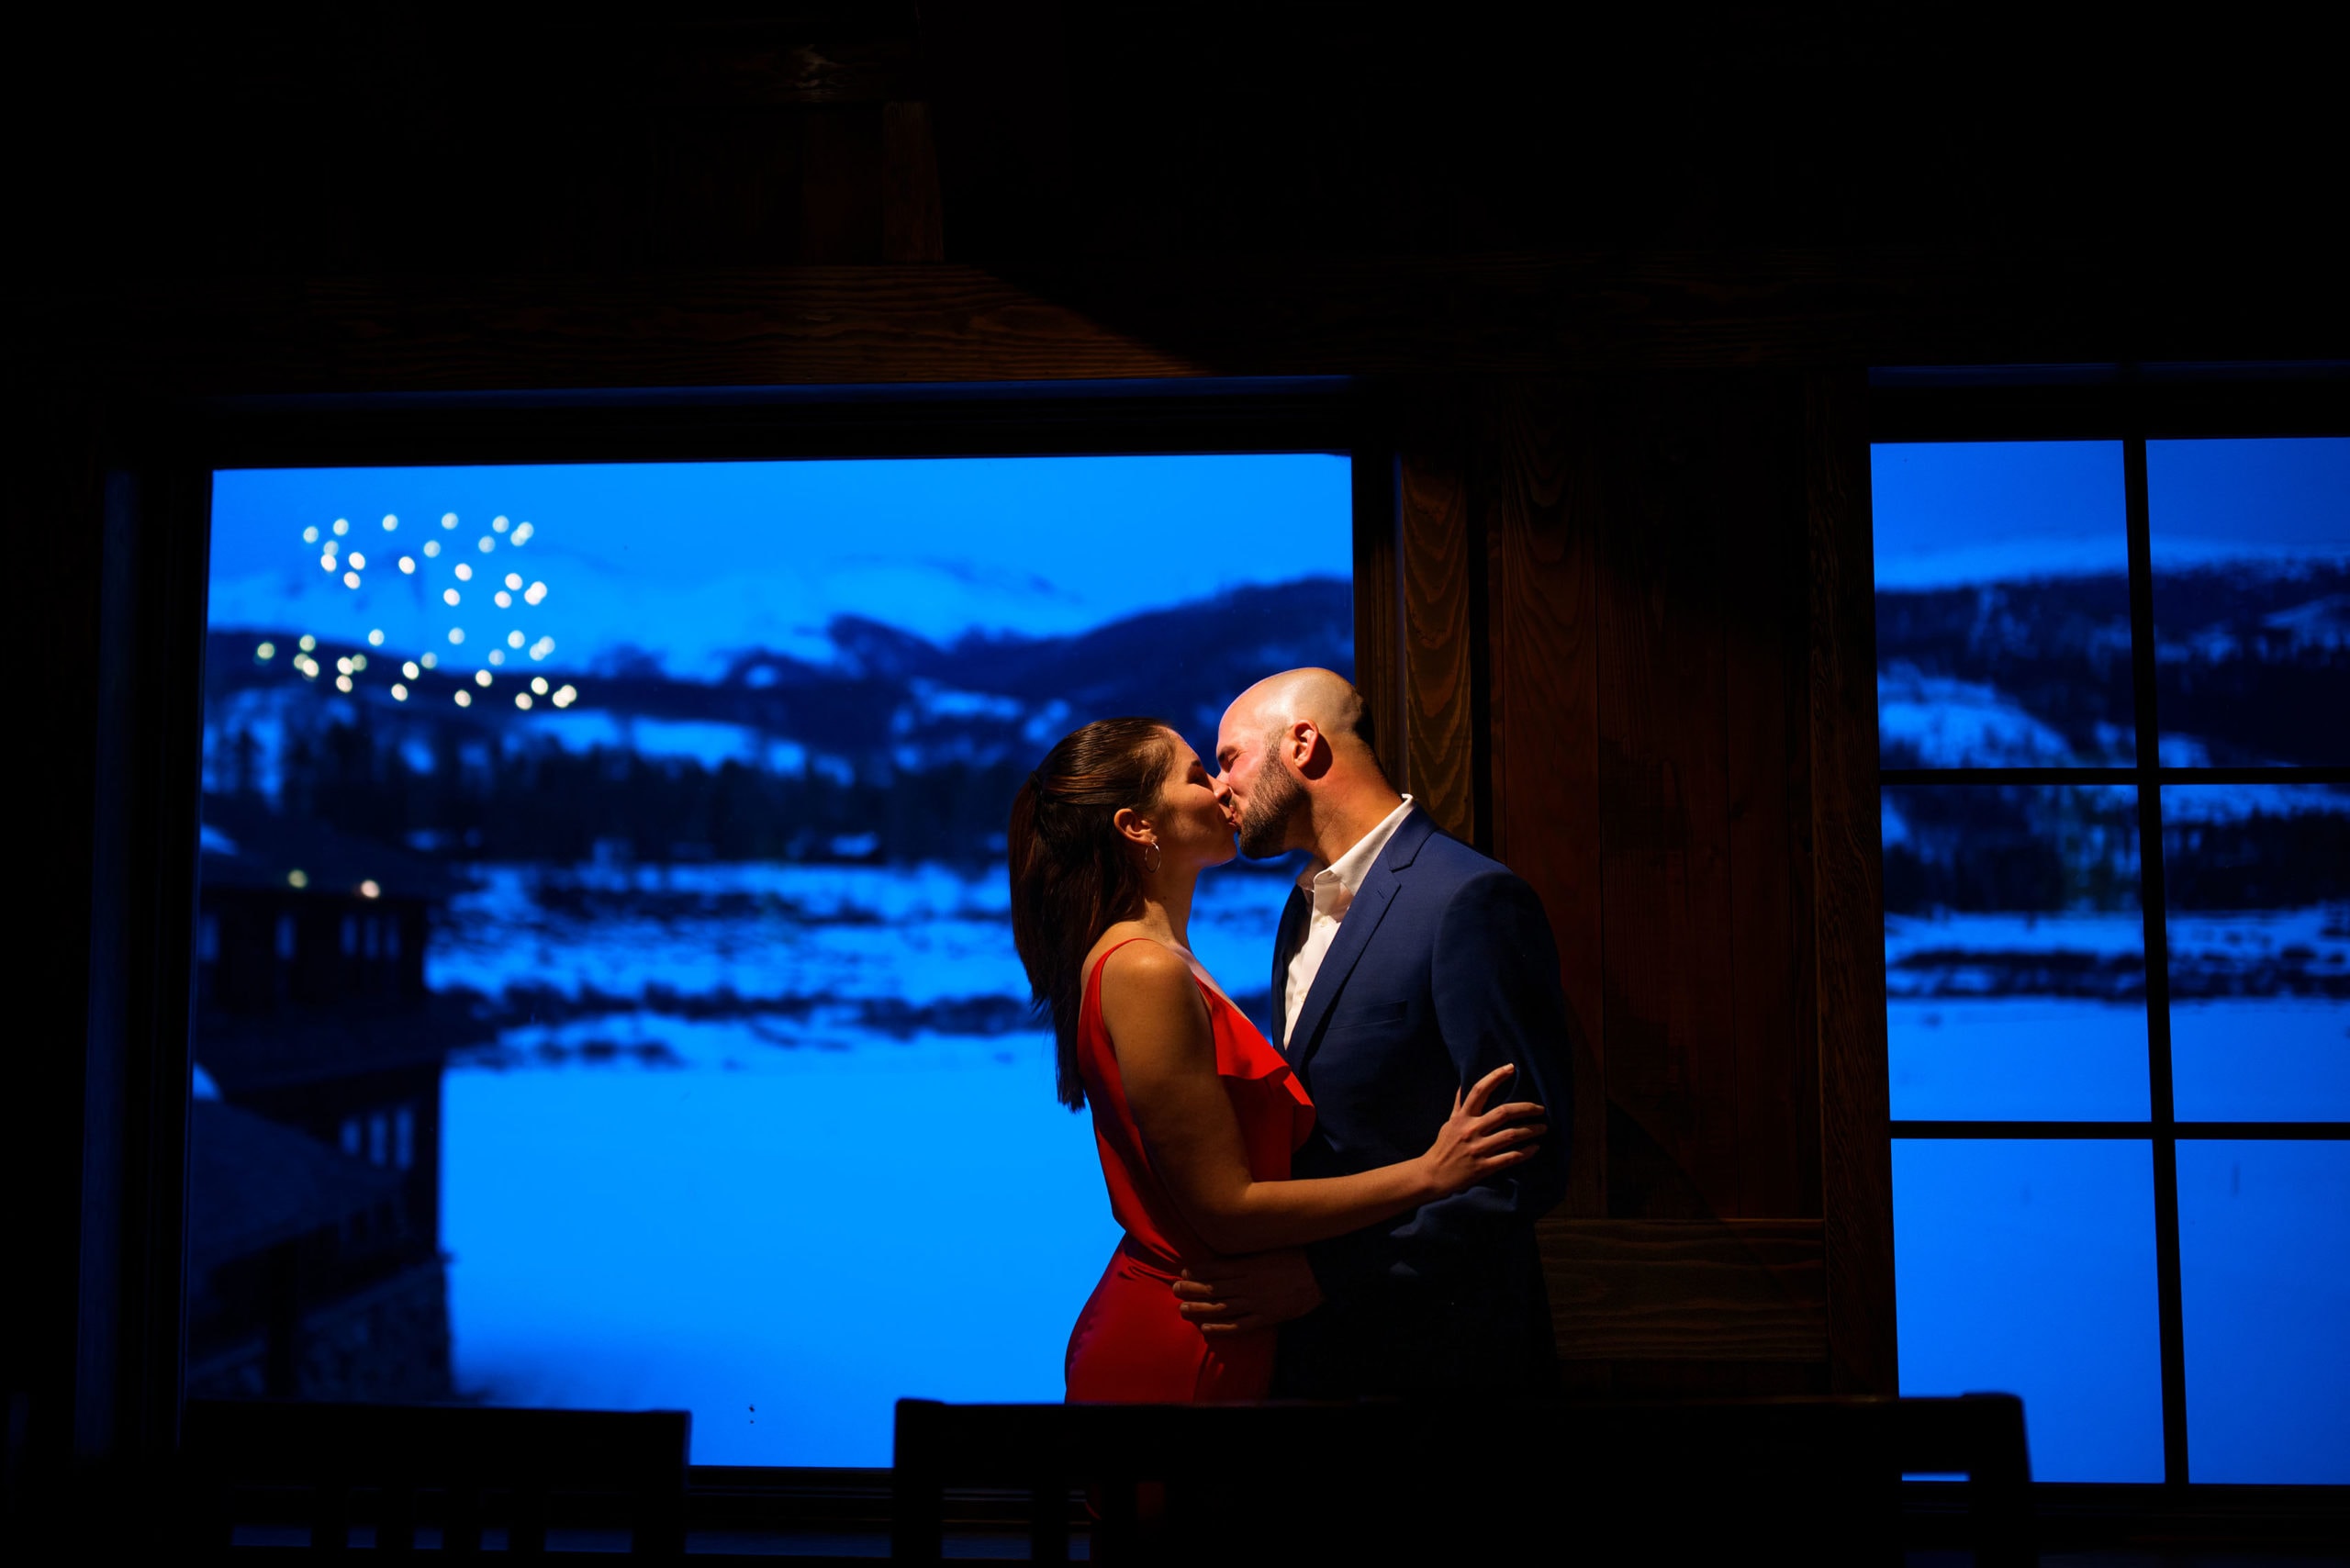 Michael and Sarah share a kiss in the bar at Devil’s Thumb Ranch during twilight